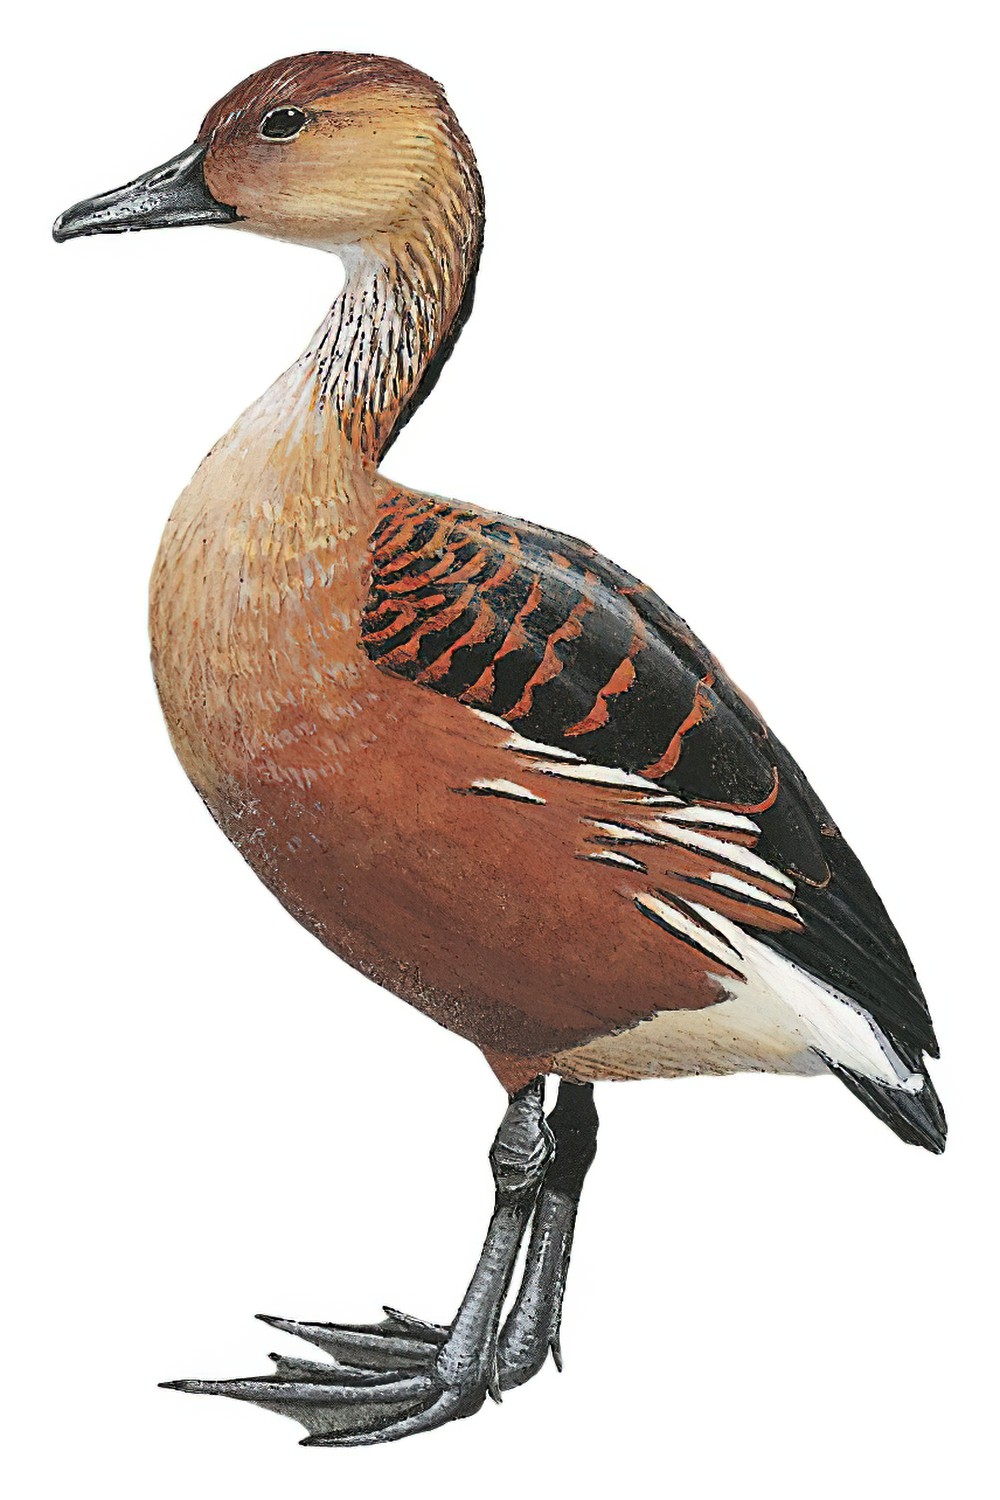 Fulvous Whistling-Duck / Dendrocygna bicolor